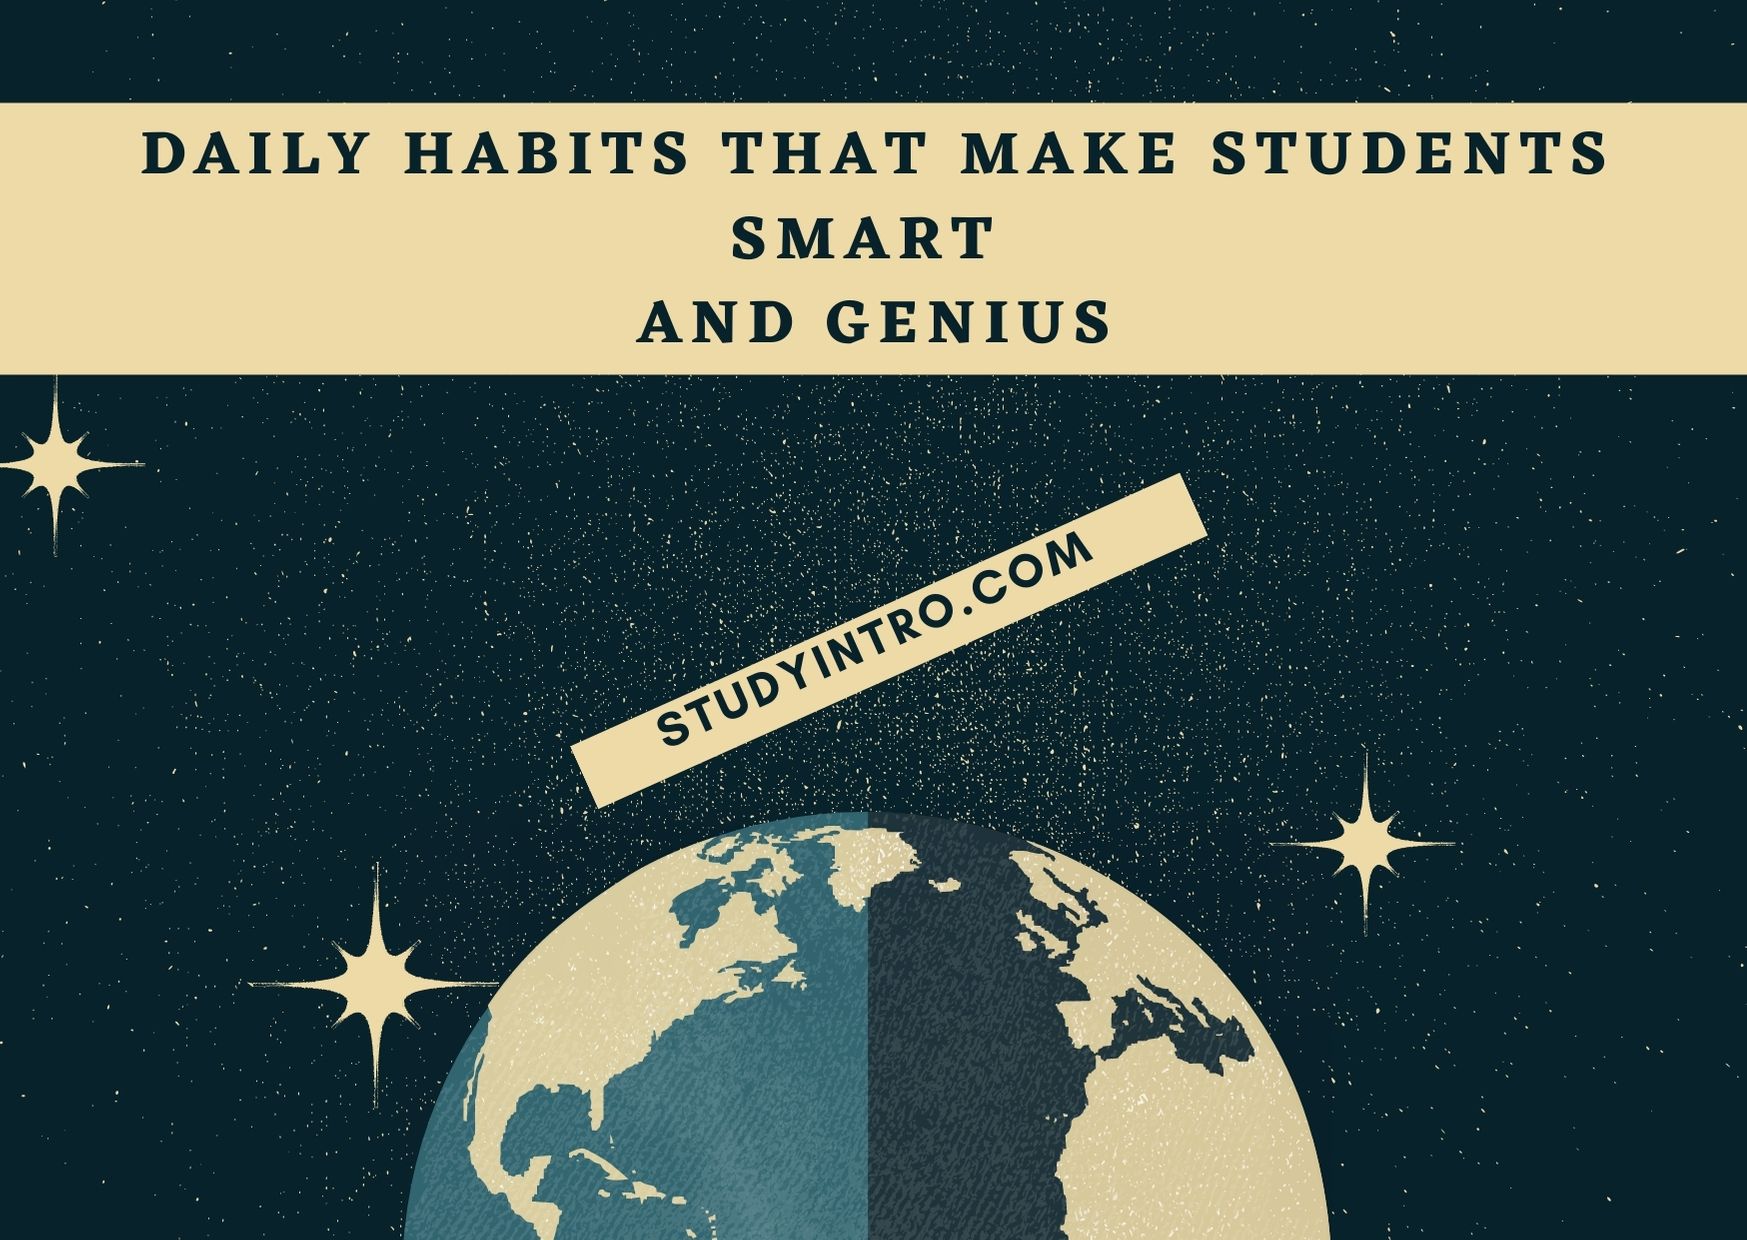 Daily Habits that make students smart and genius